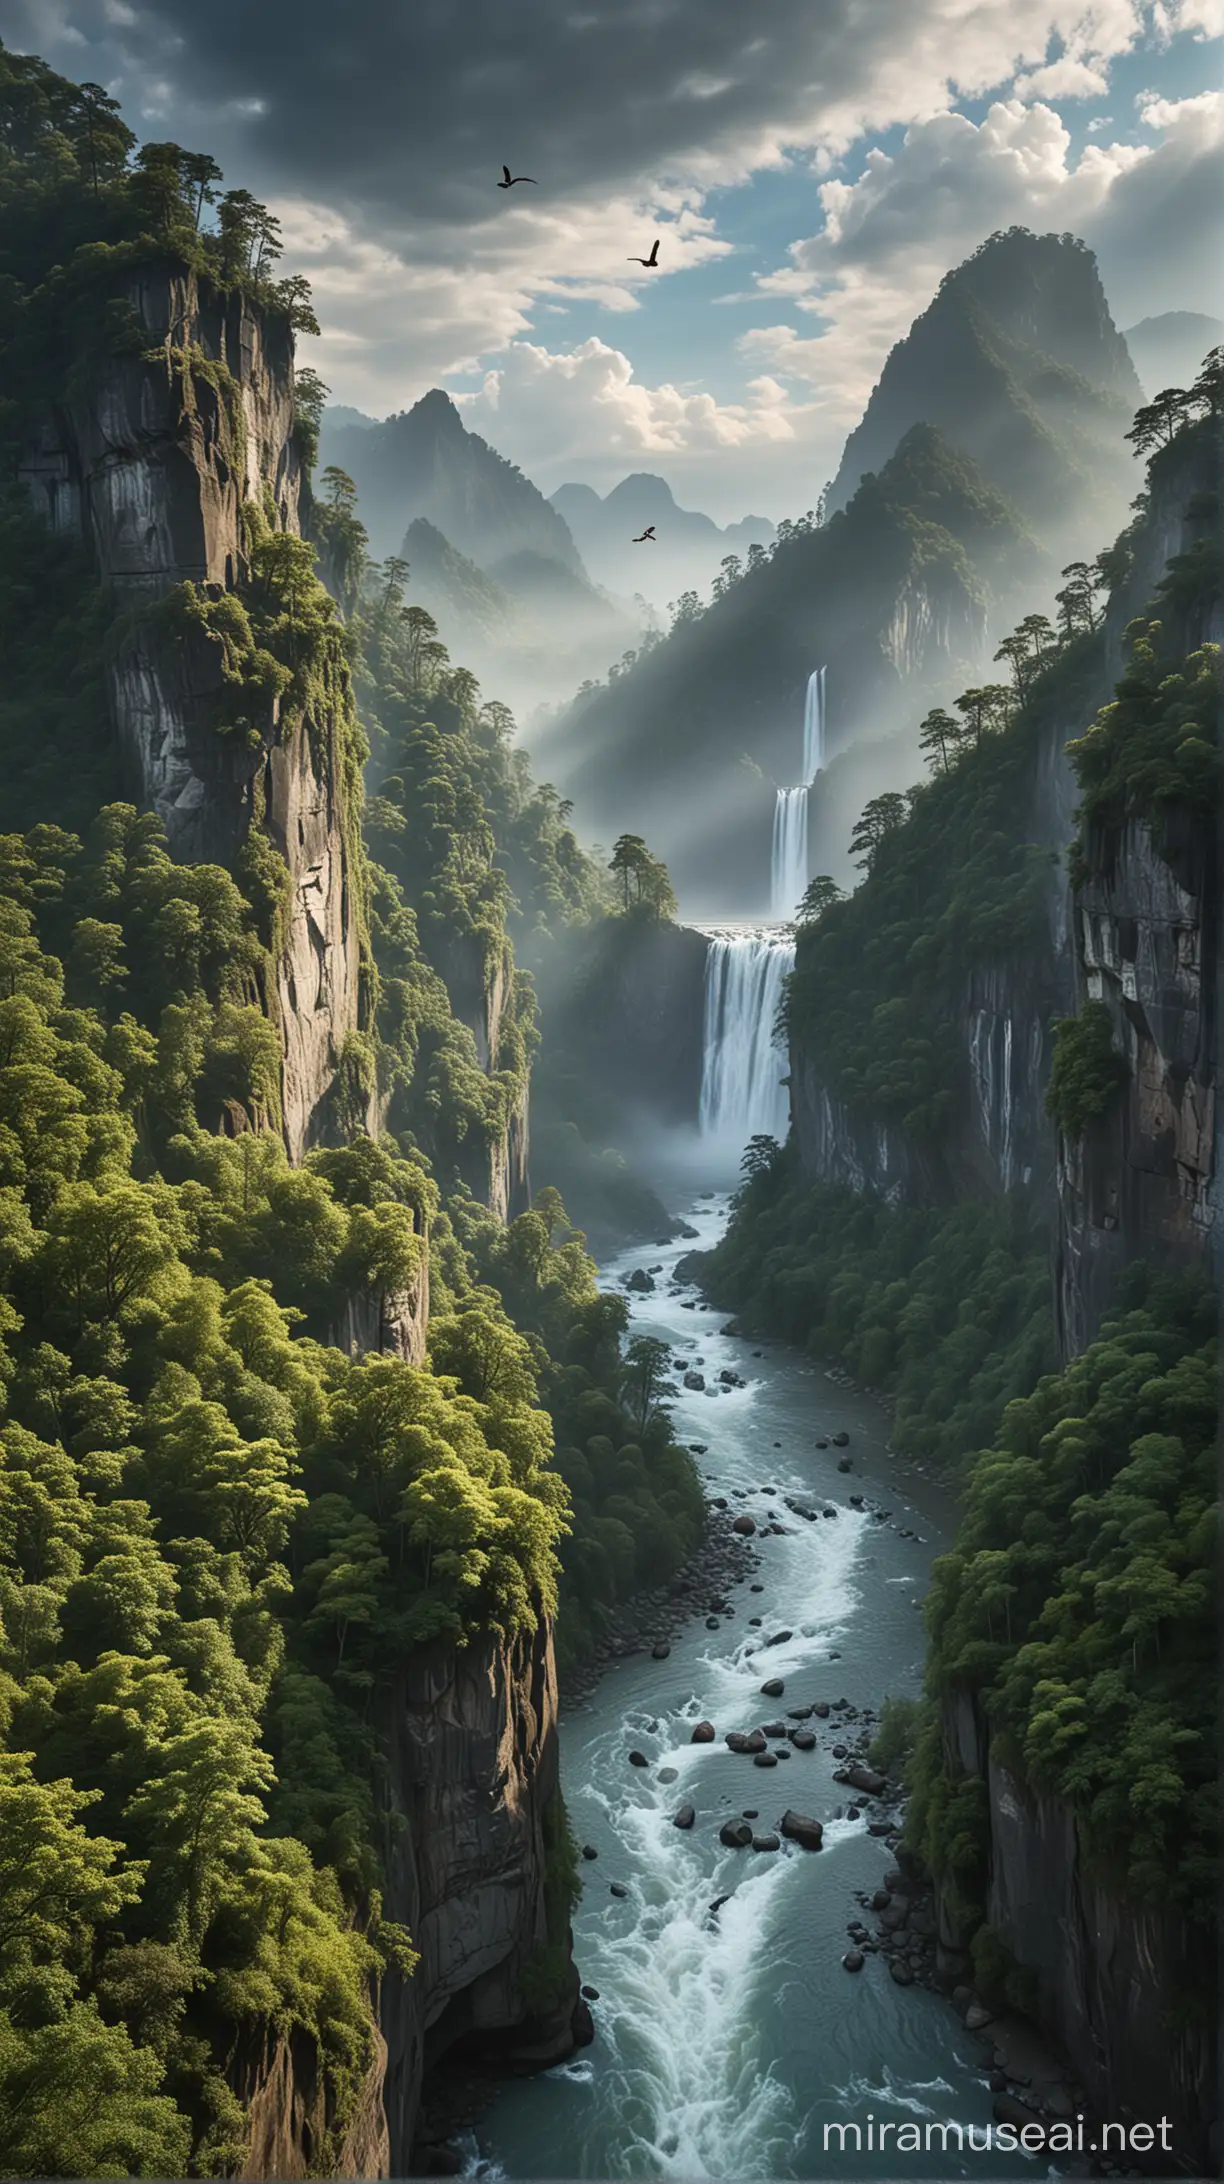 Majestic Mountain Landscape Photography Capturing Natures Timeless Beauty